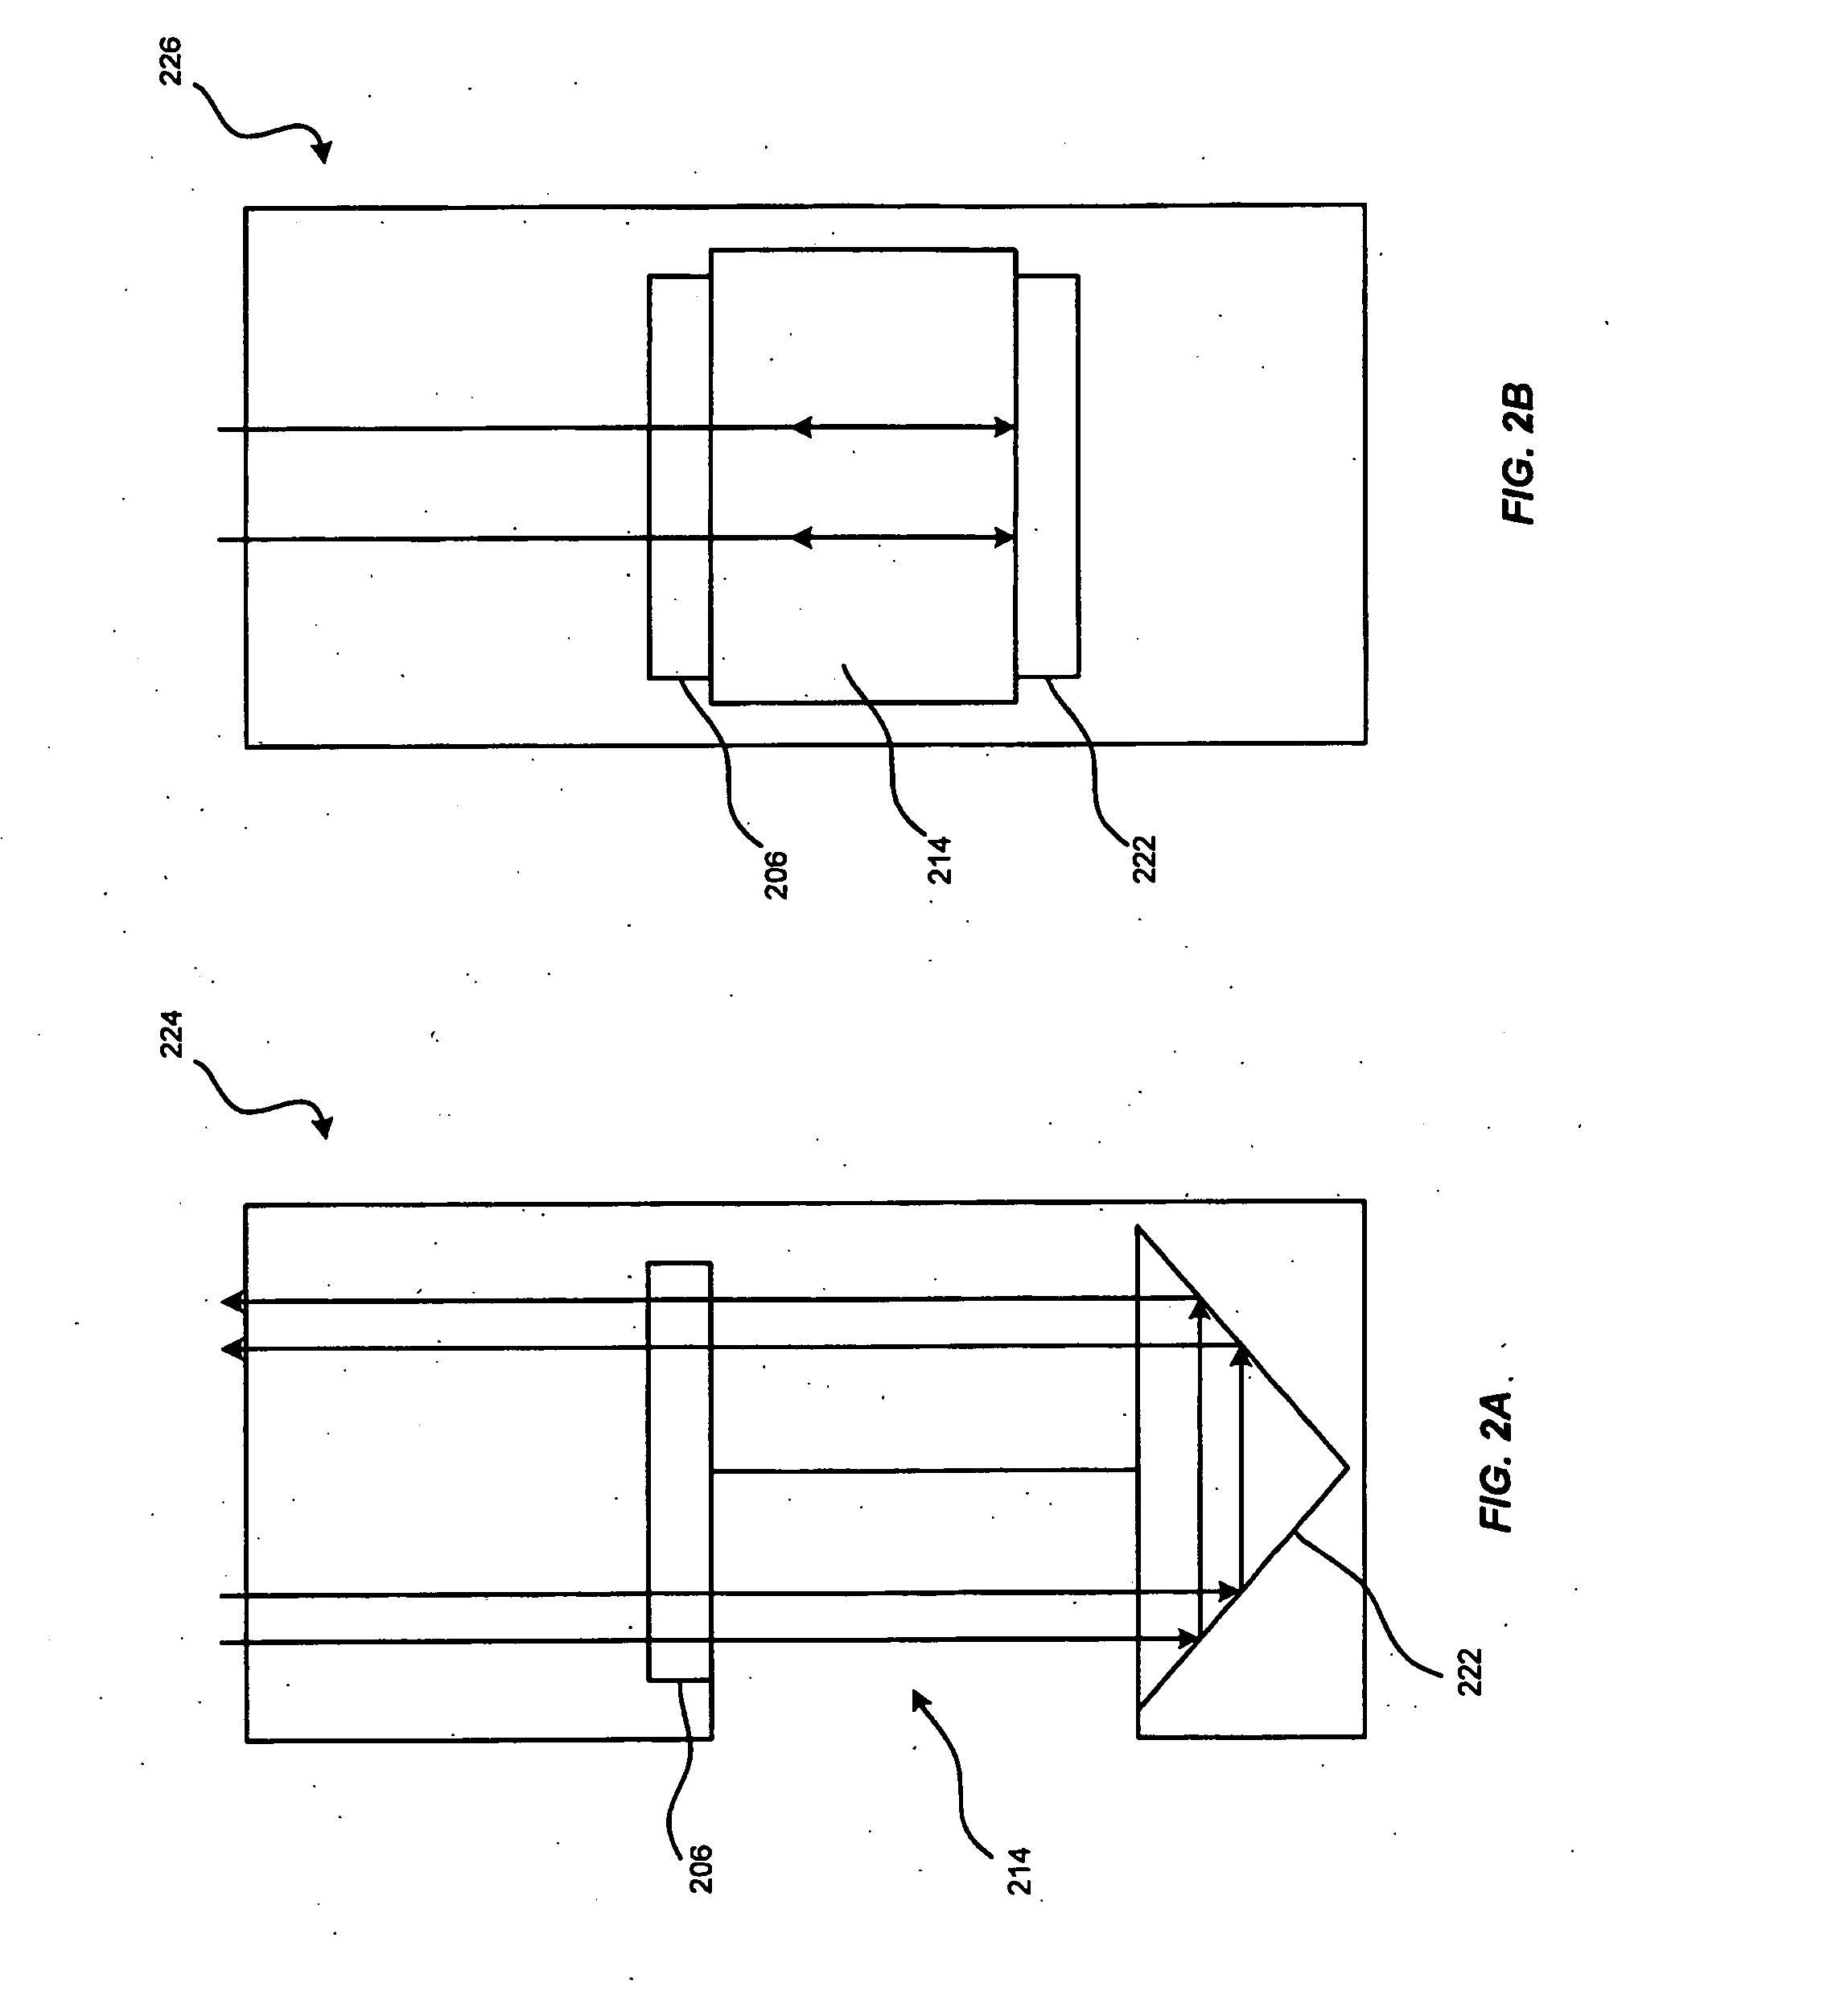 Immersion probe using ultraviolet and infrared radiation for multi-phase flow analysis